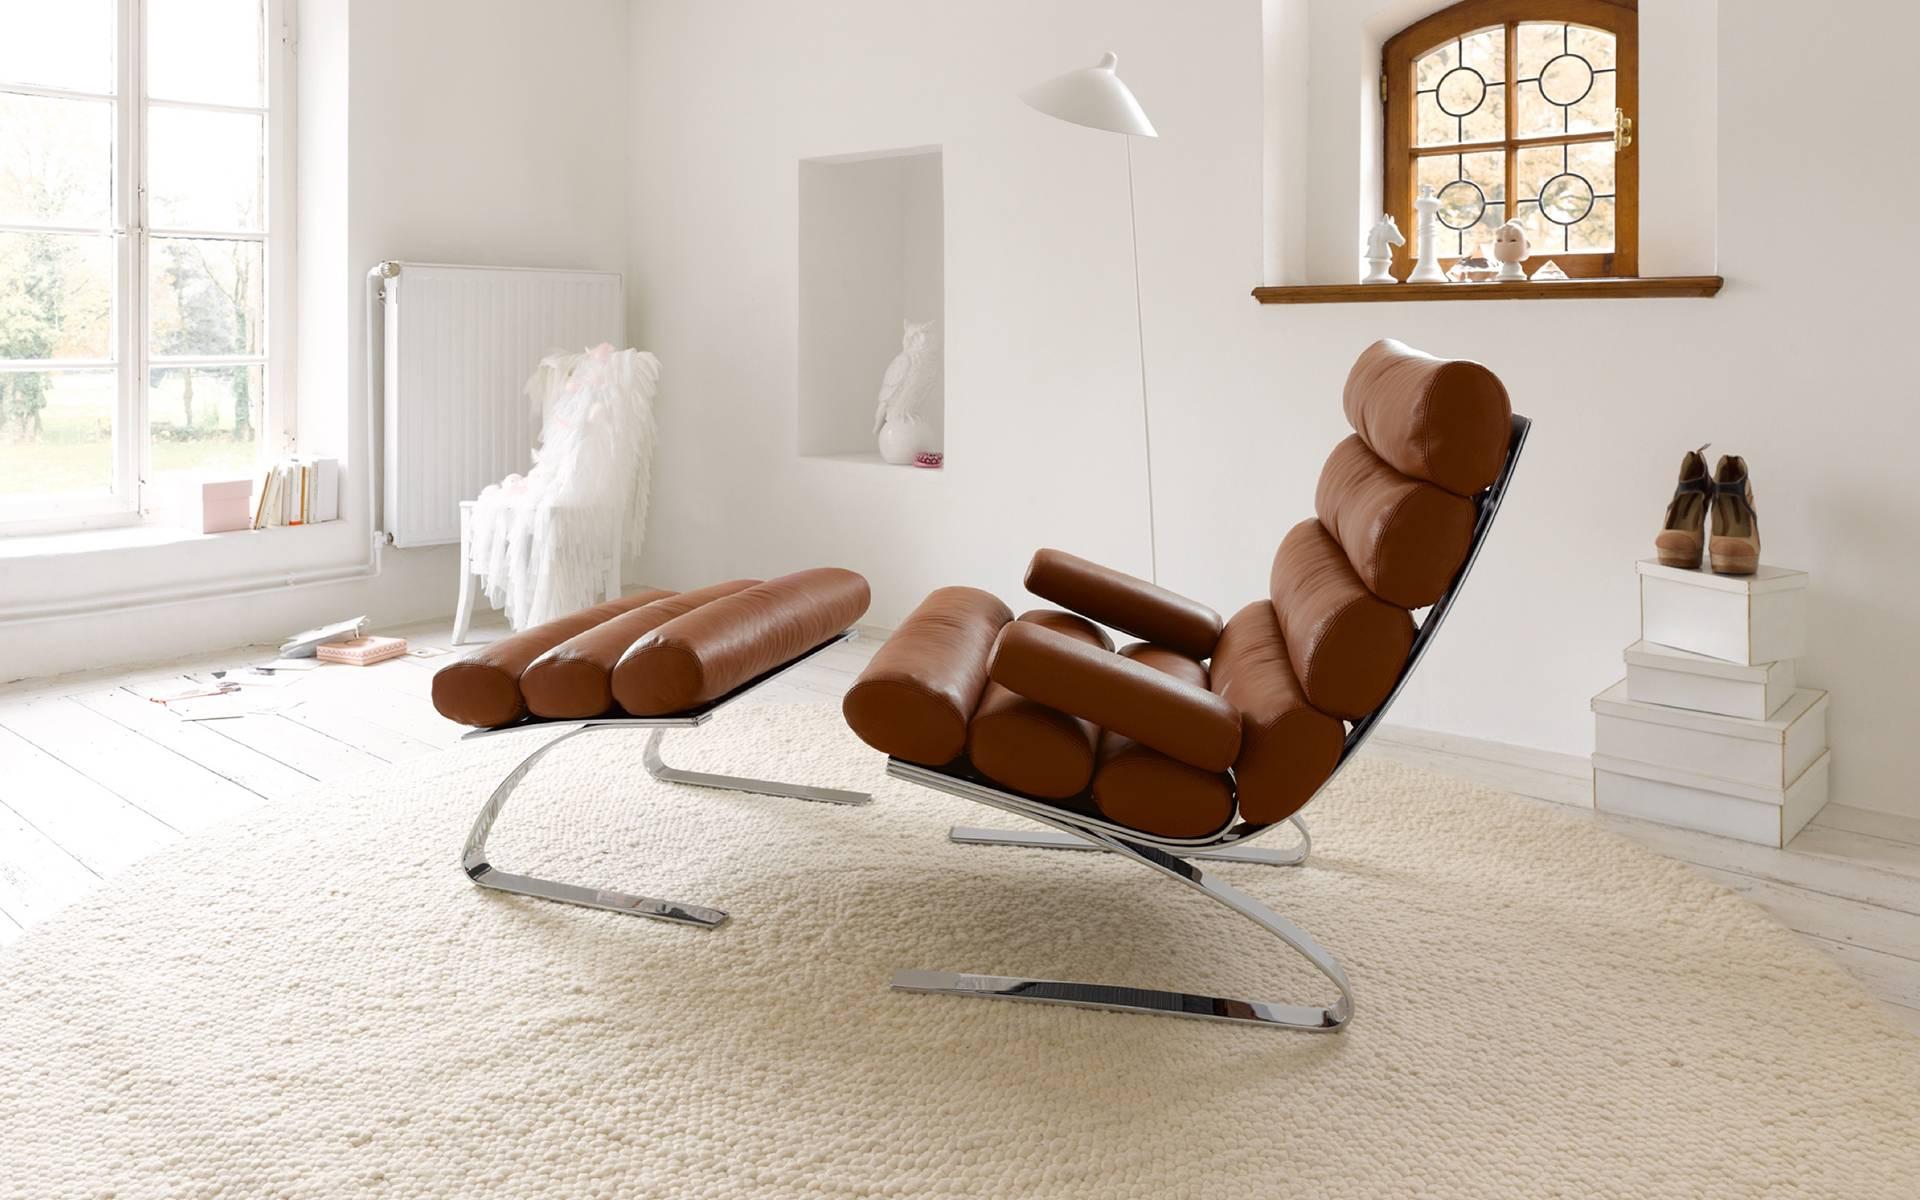 Sinus Lounge Chair with Ottoman by COR (Moderne) im Angebot